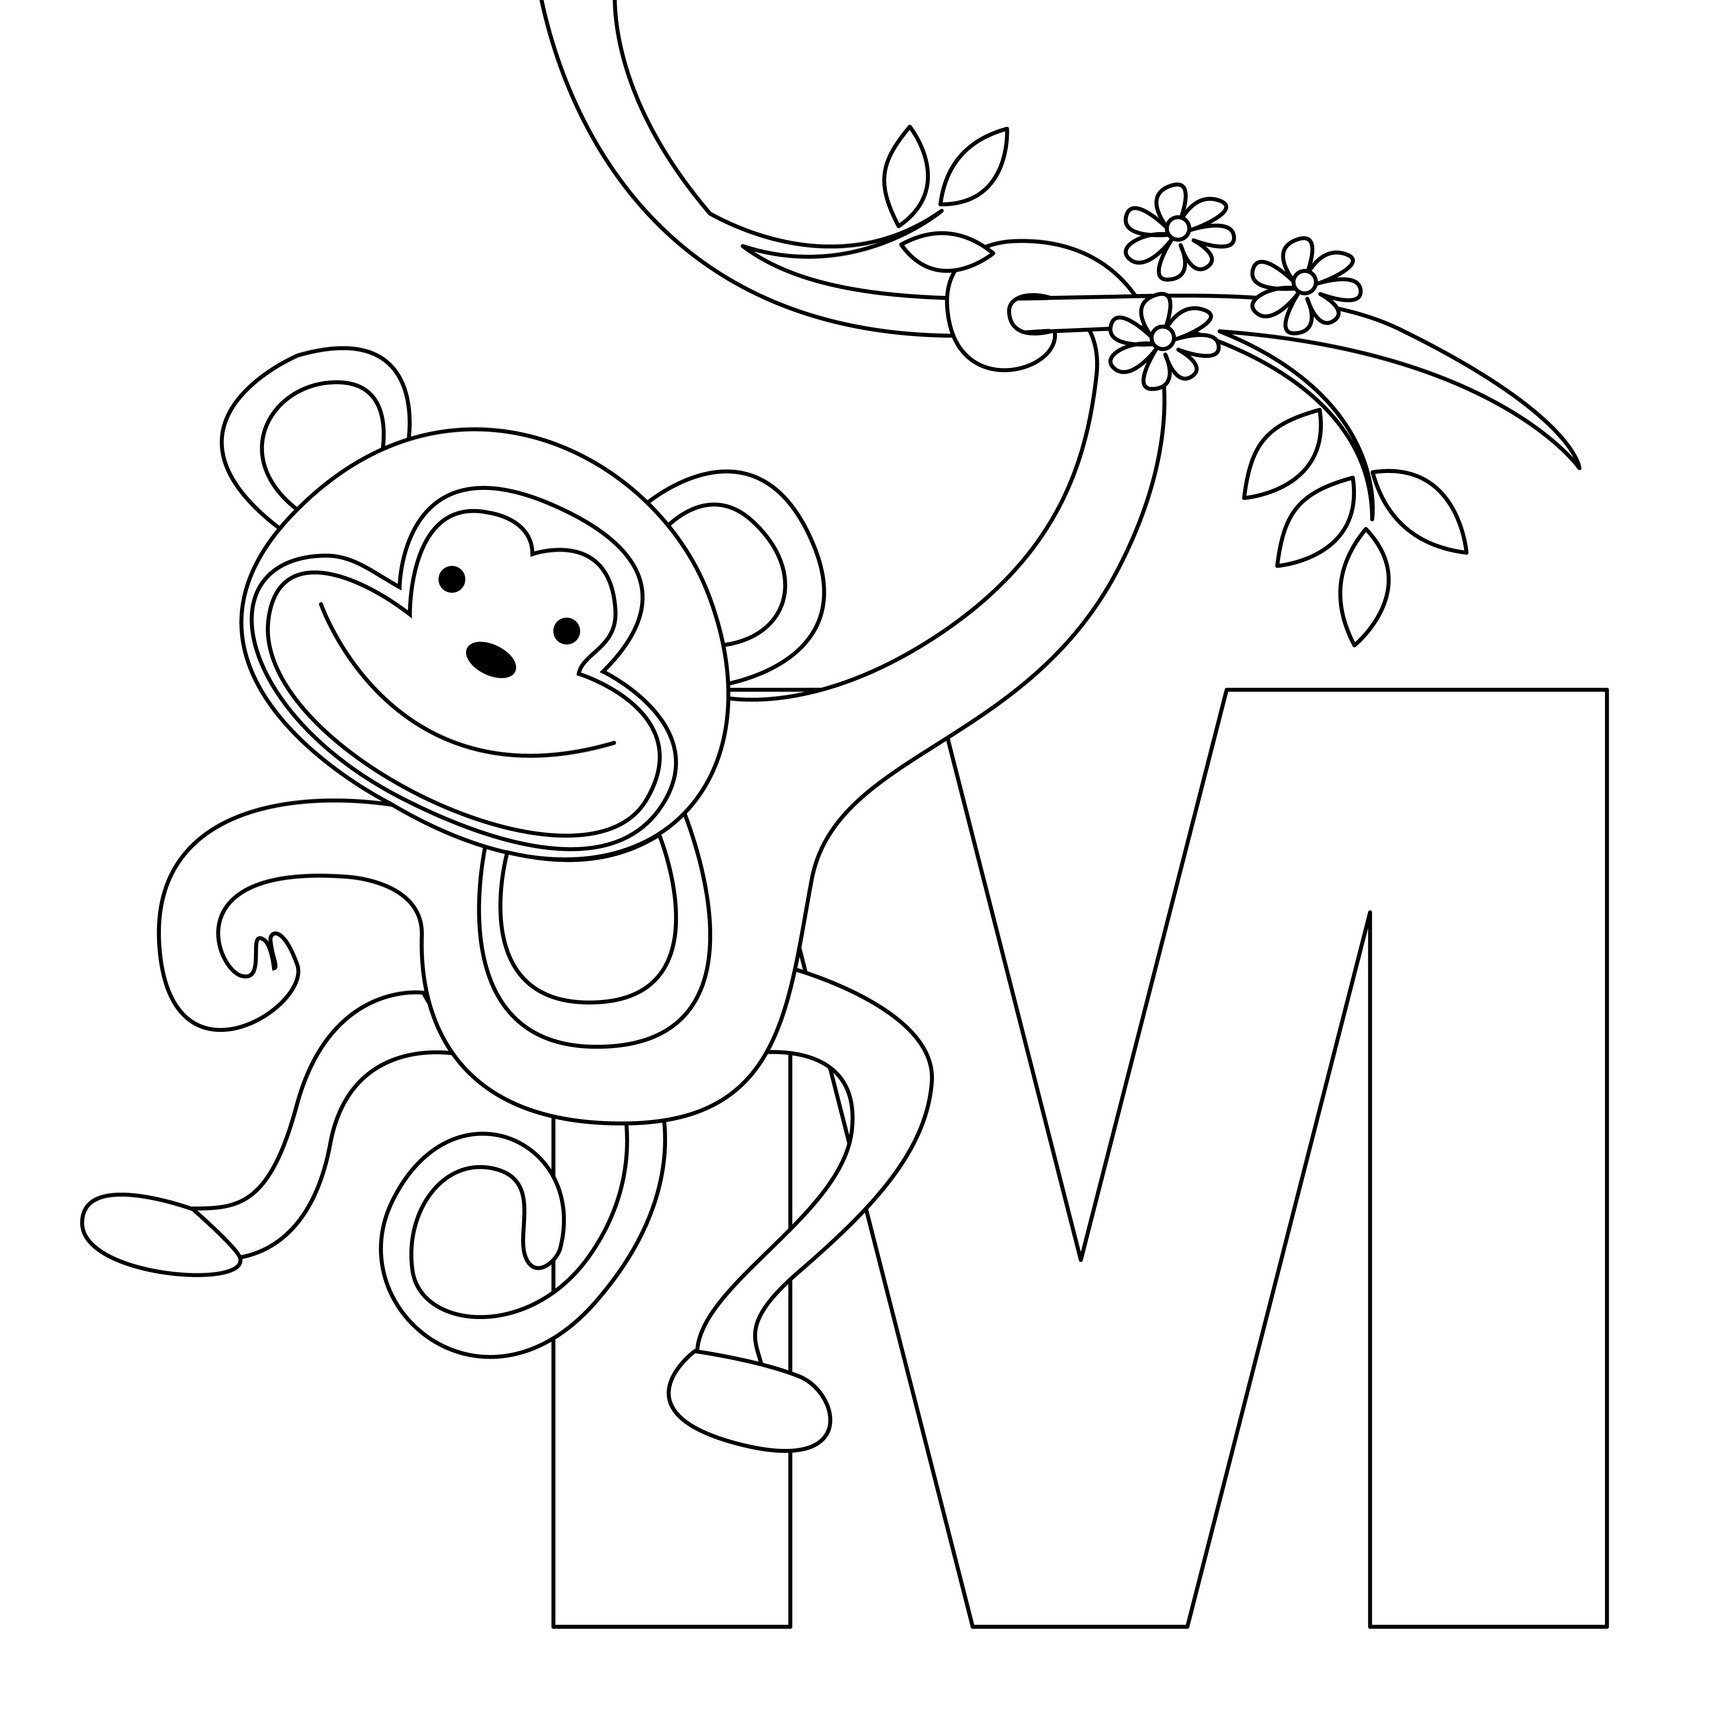 Sock Monkey Coloring Page Easy Monkey Coloring Page Printable Coloring Page For Kids